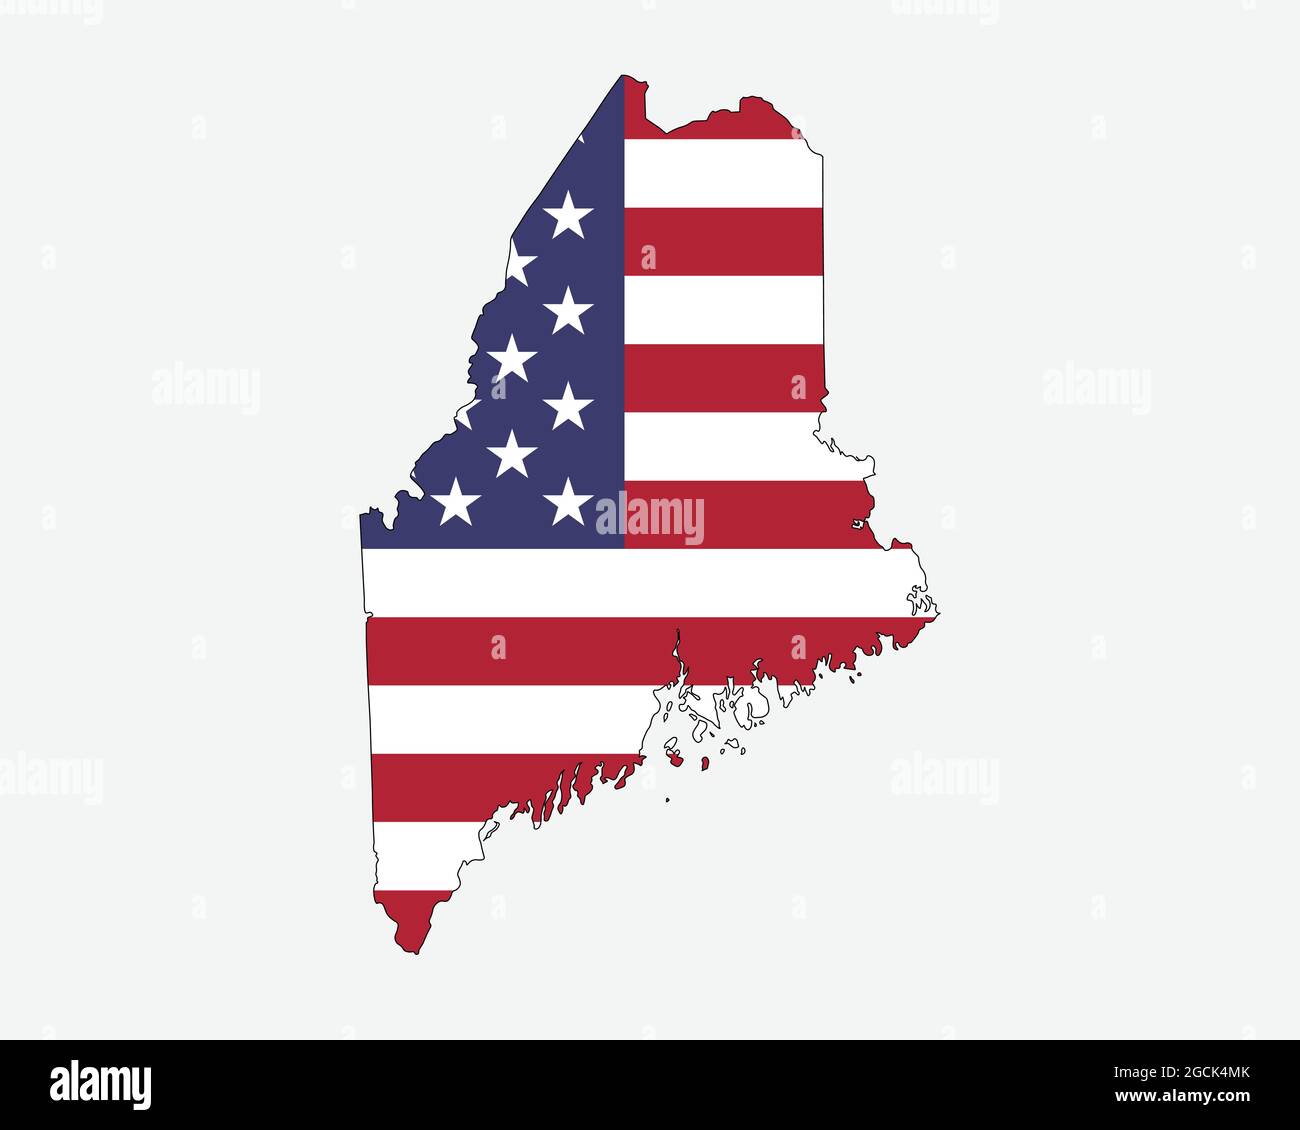 Maine Map on American Flag. ME, USA State Map on US Flag. EPS Vector Graphic Clipart Icon Stock Vector